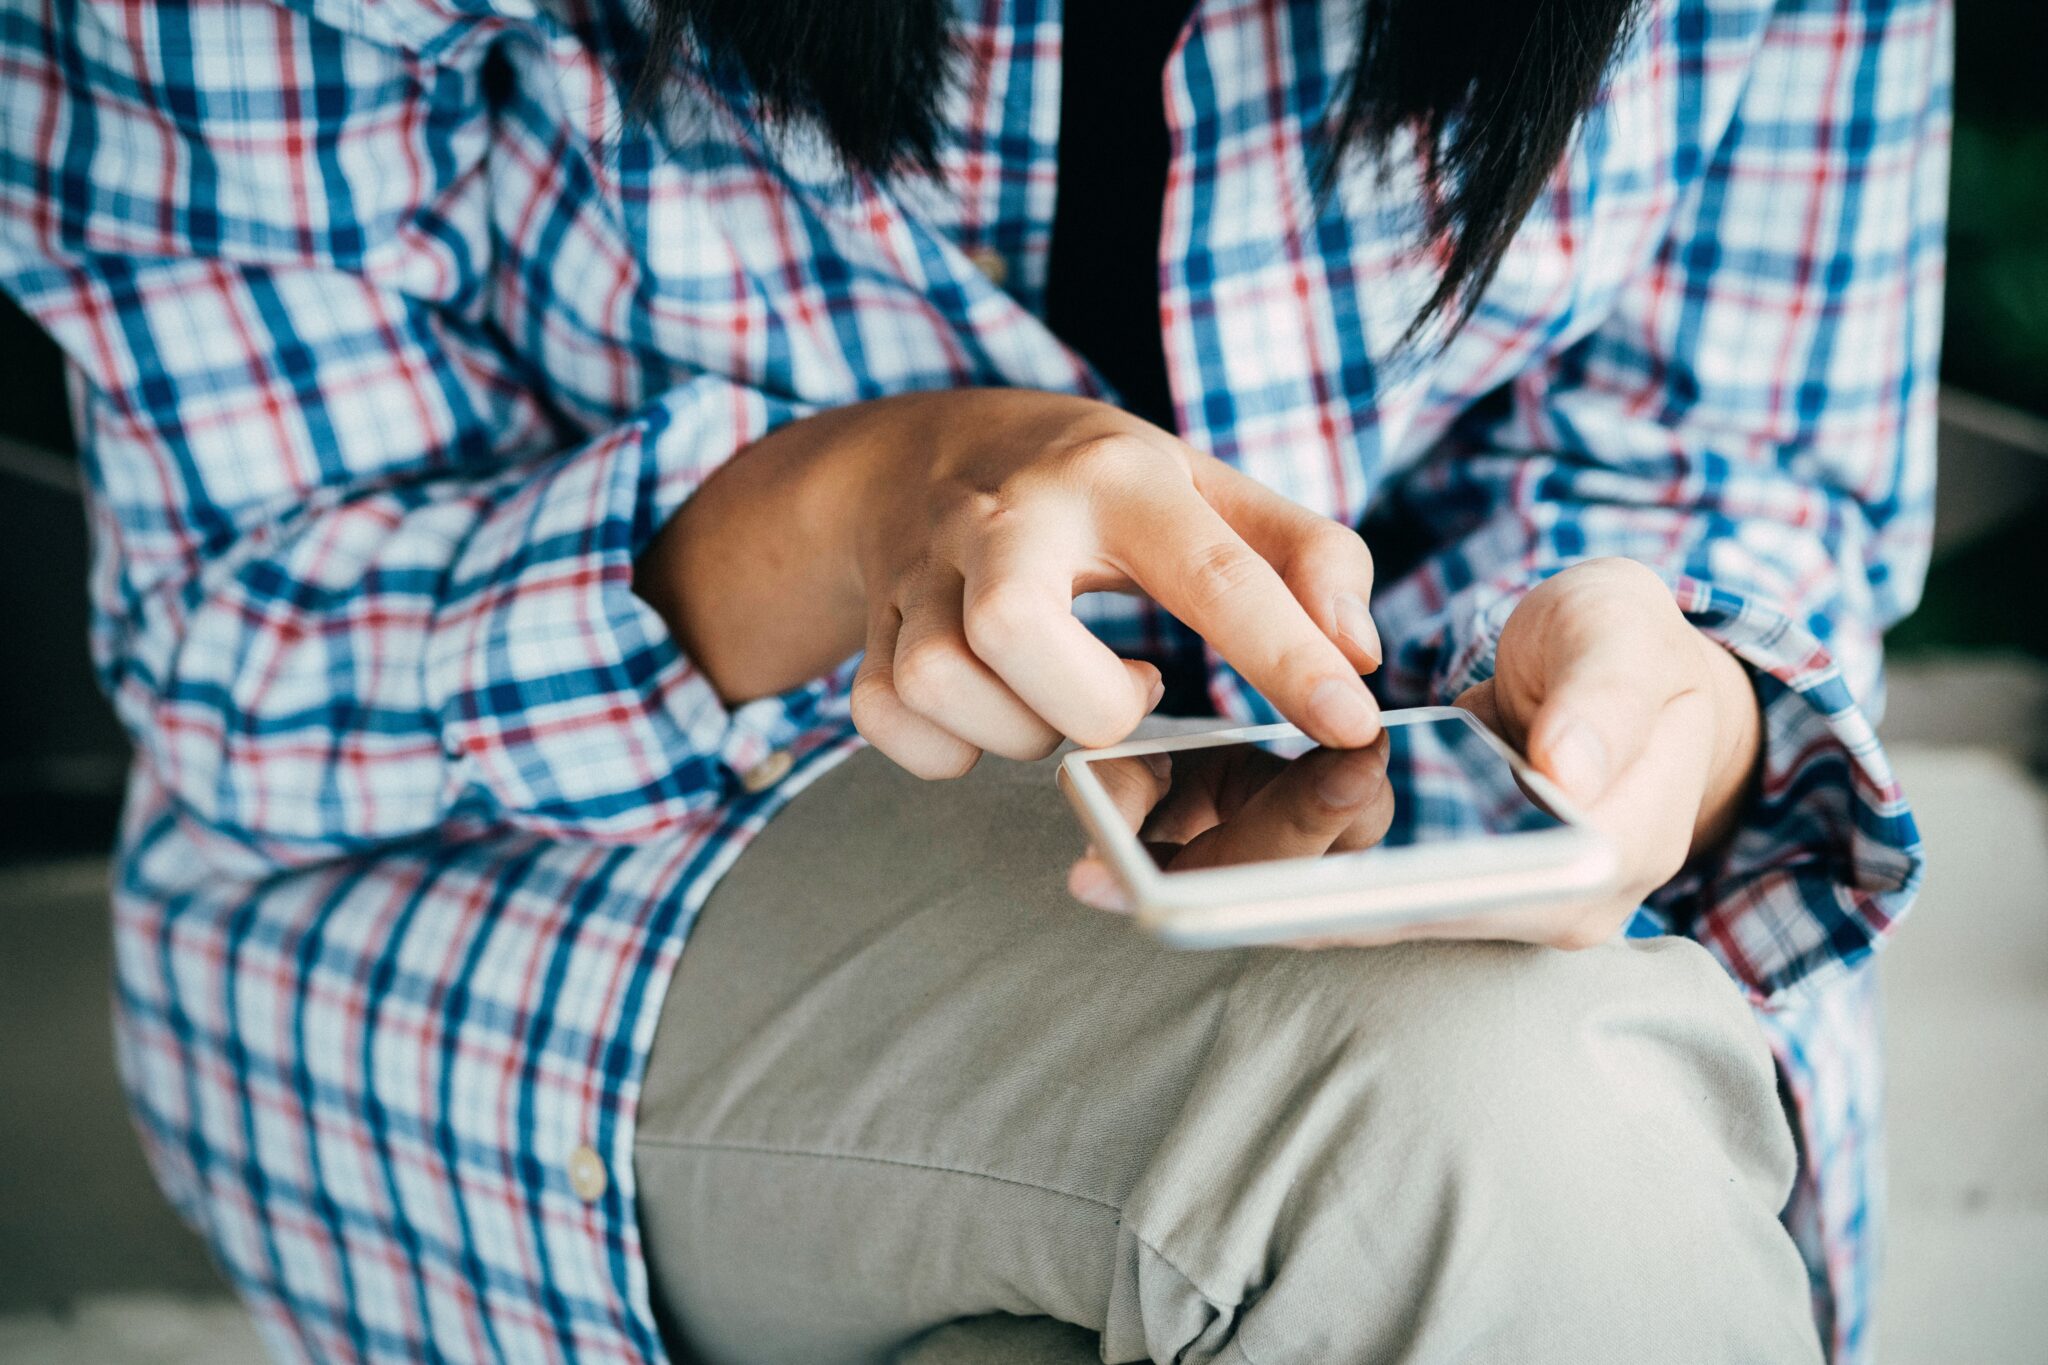 Women sits crossed legged while scrolling through her mobile phone